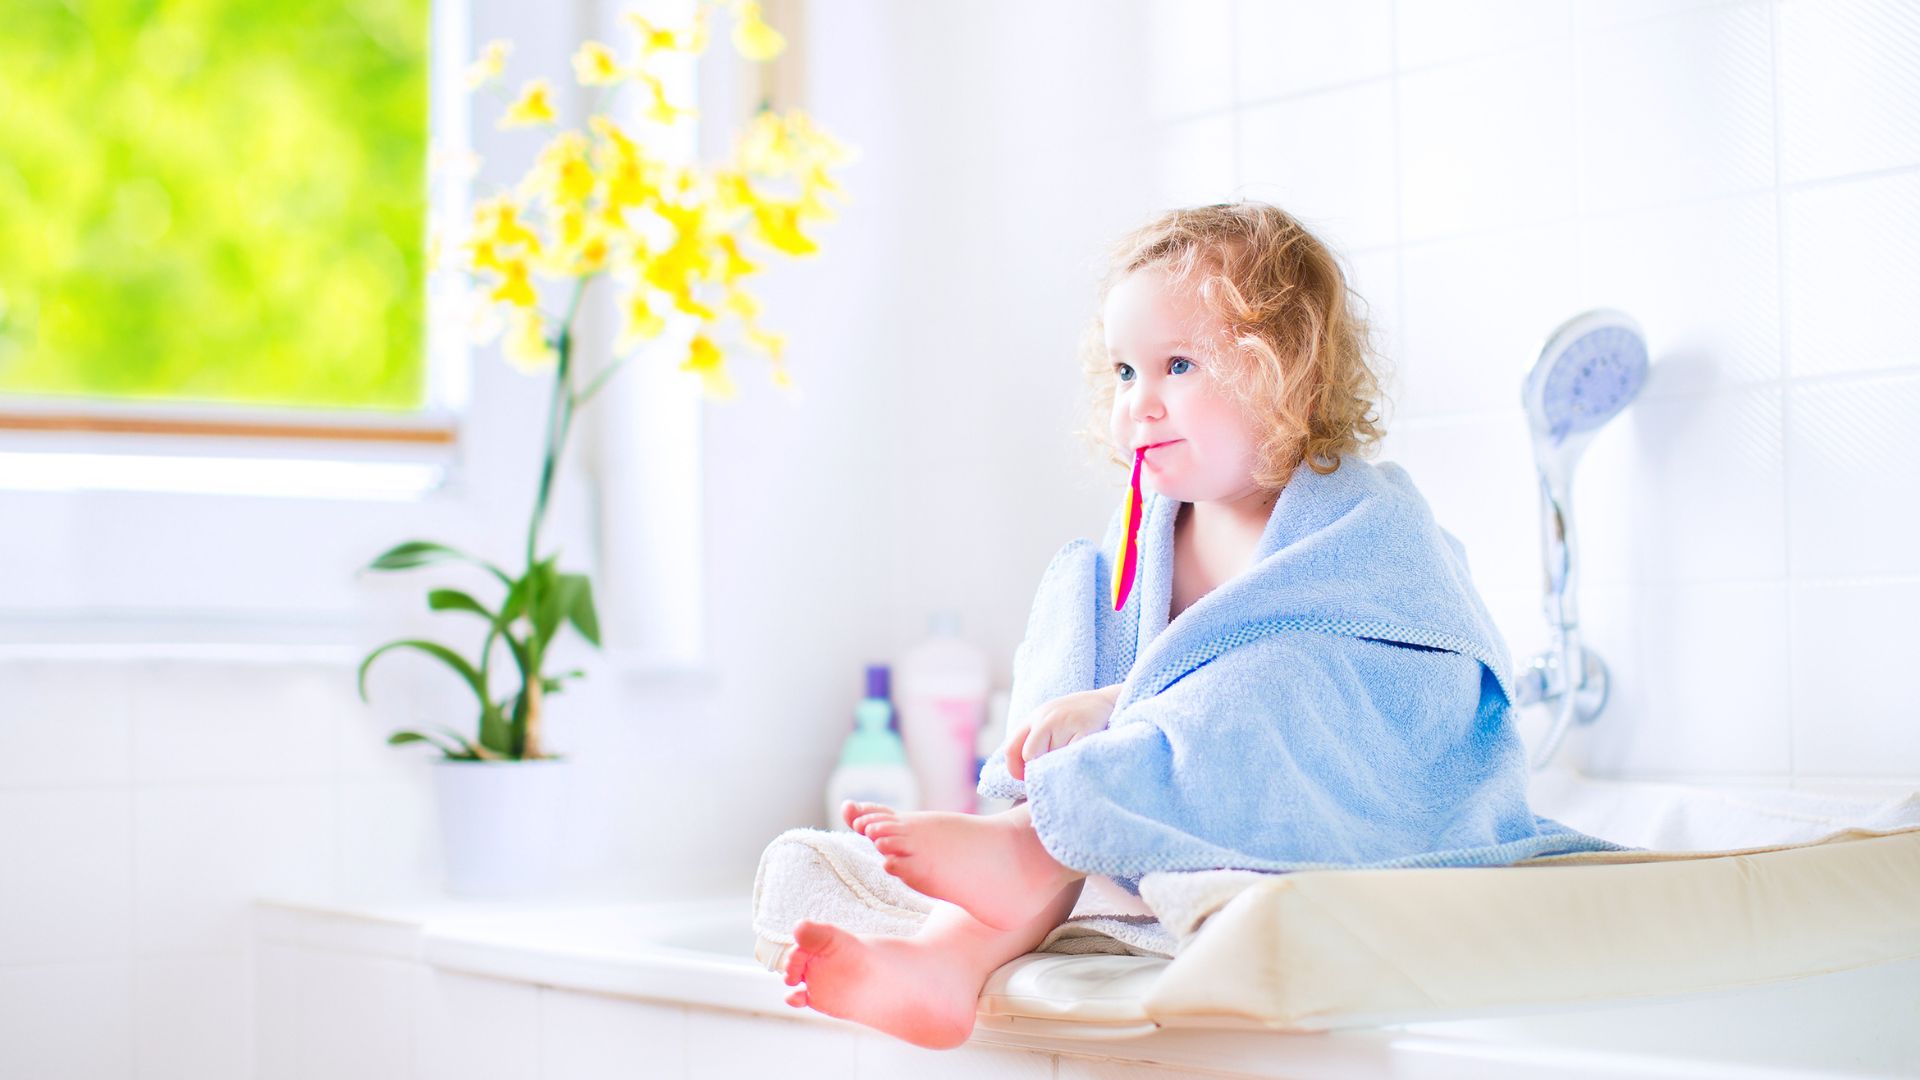 A Small Baby, Wrapped in a Soft Towel, Brushes Her Teeth